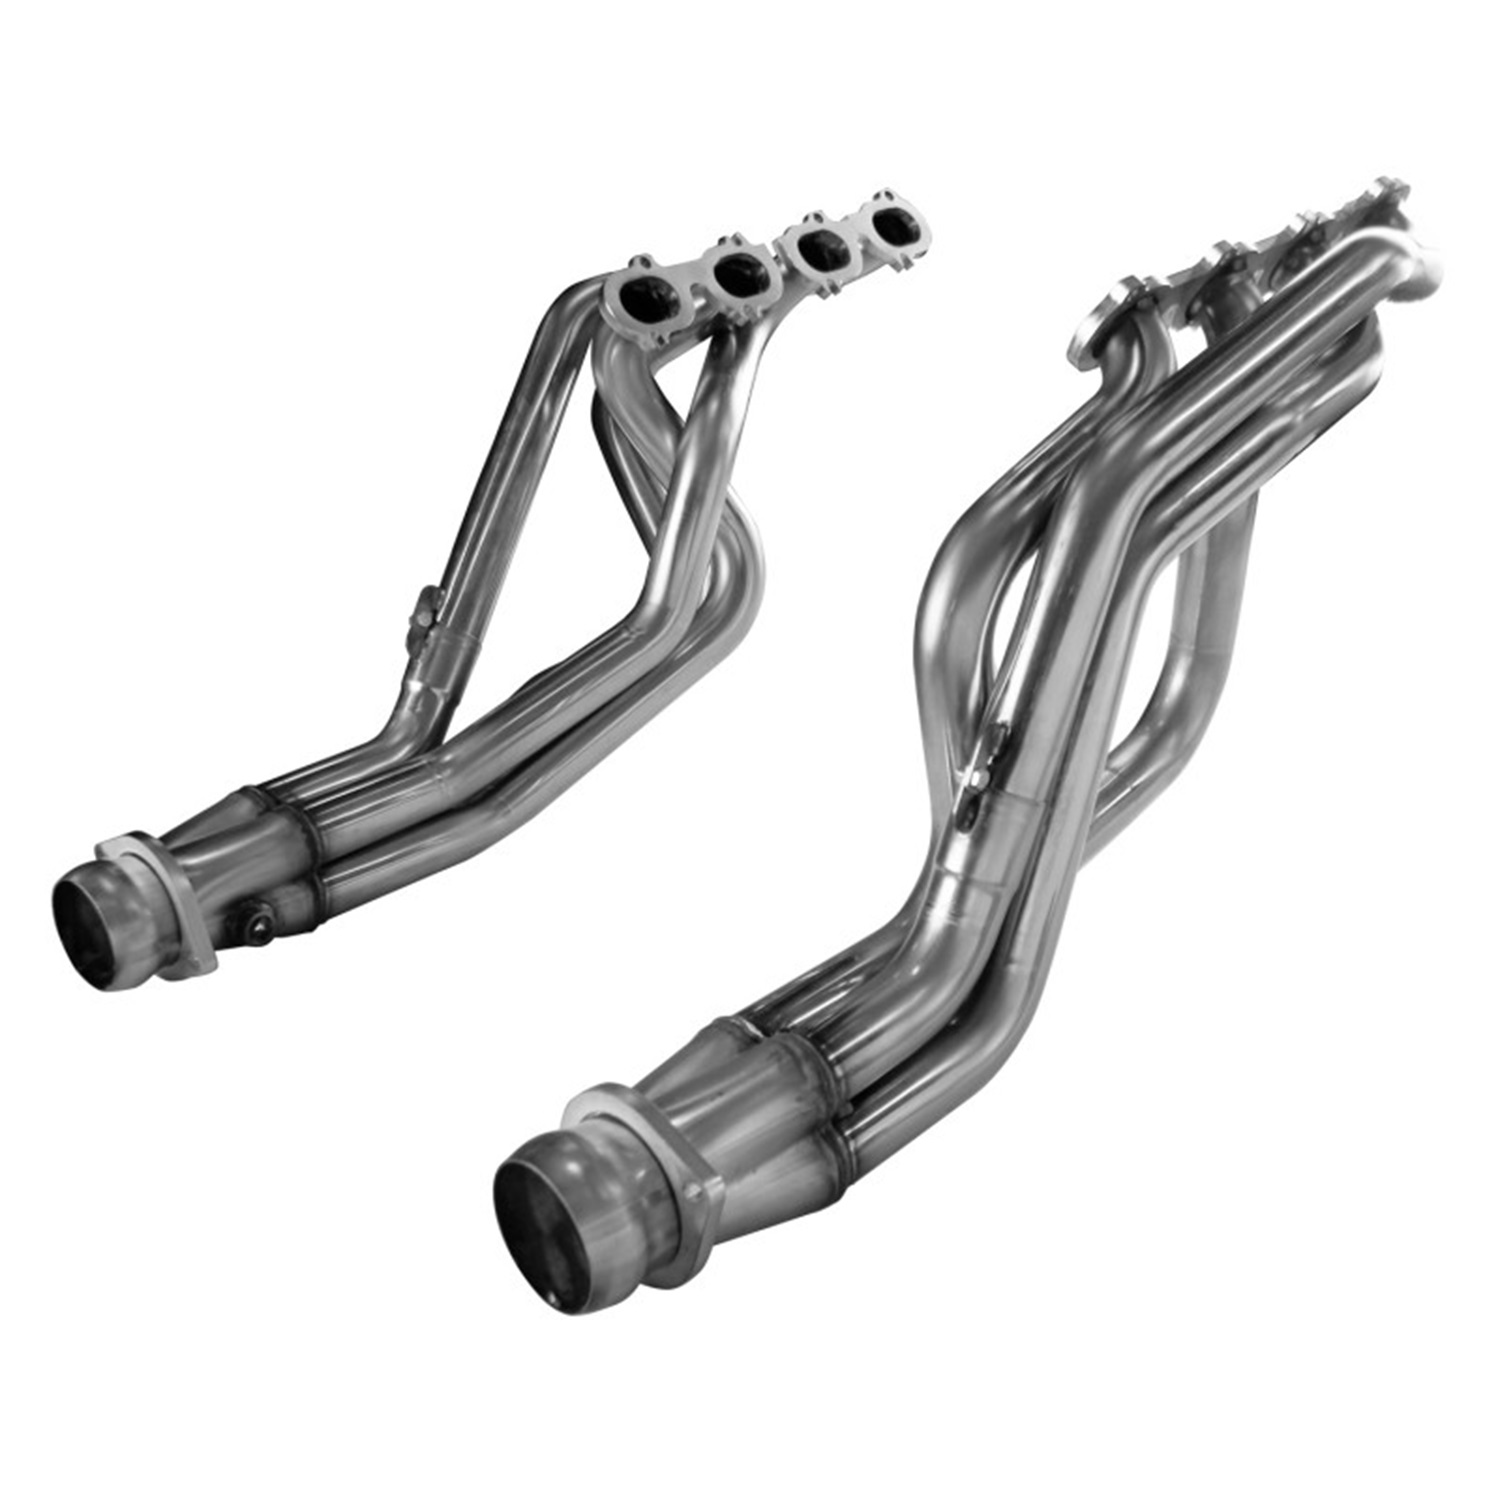 Stainless Steel Headers 1.875 x 3" Long Tube Incl. 1 Pr. 24" O2 Extension Harness No EGR